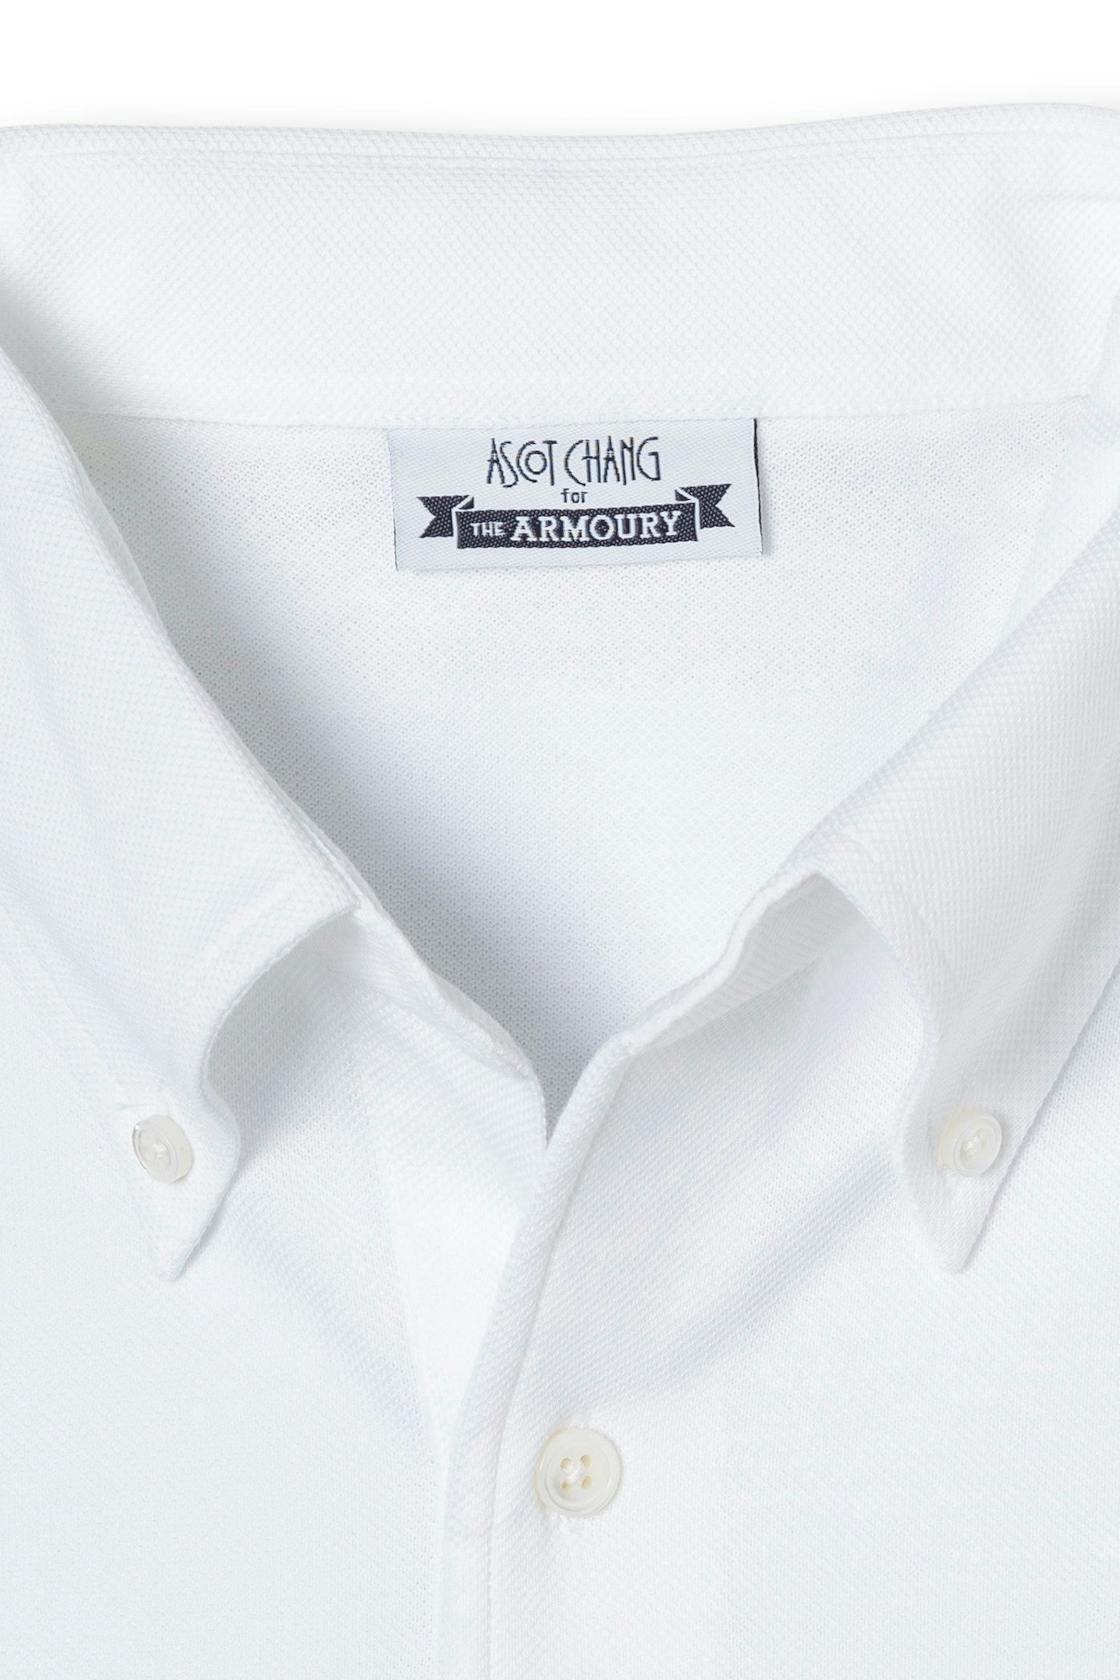 The Armoury by Ascot Chang White Short Sleeve Button Down Polo